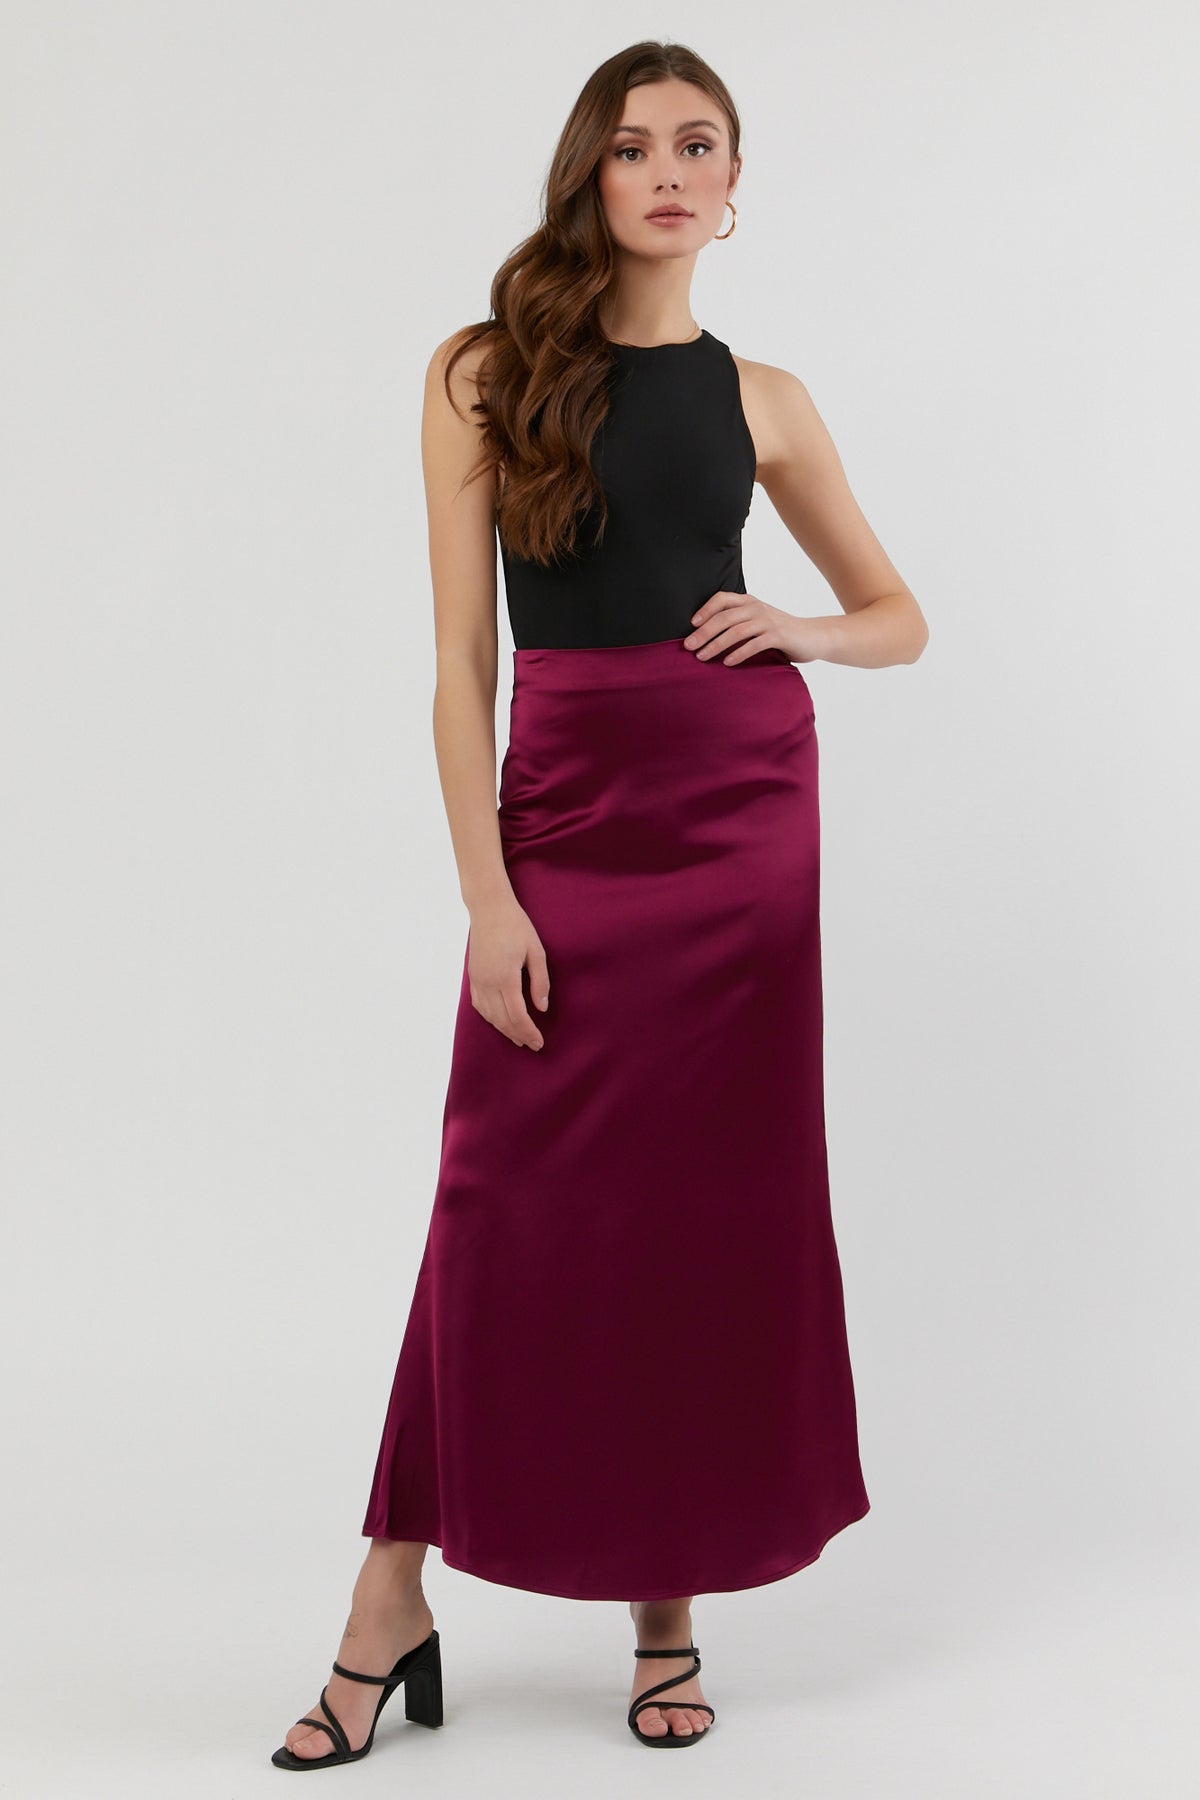 Latest designs, Satin Flare Maxi Skirt Sirens . Shop now and get